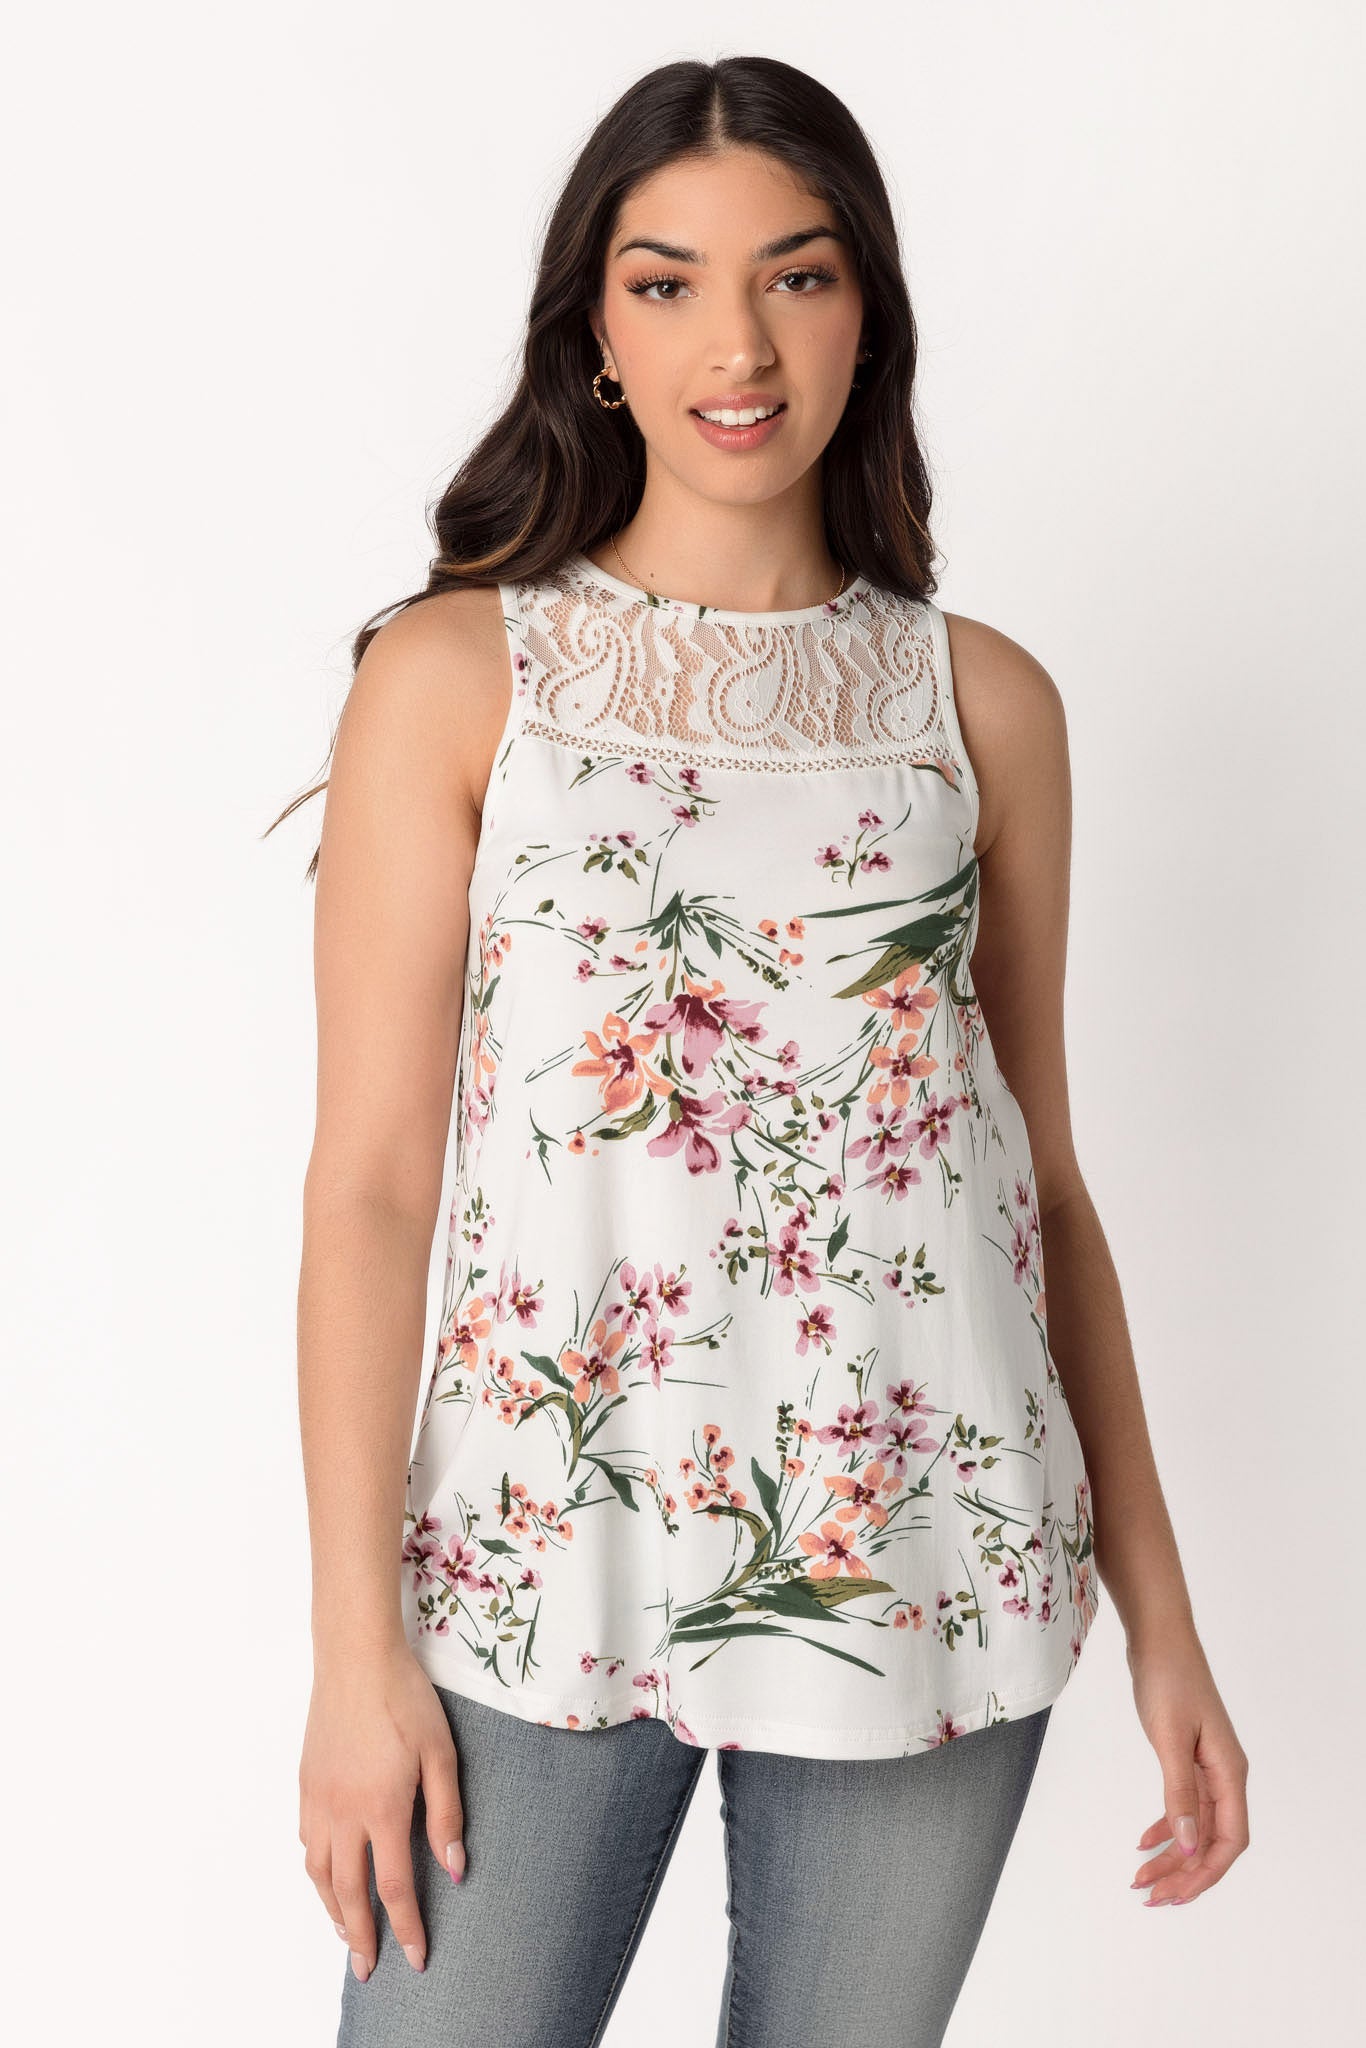 Floral Bouquet Sleeveless Top with Lace Trim